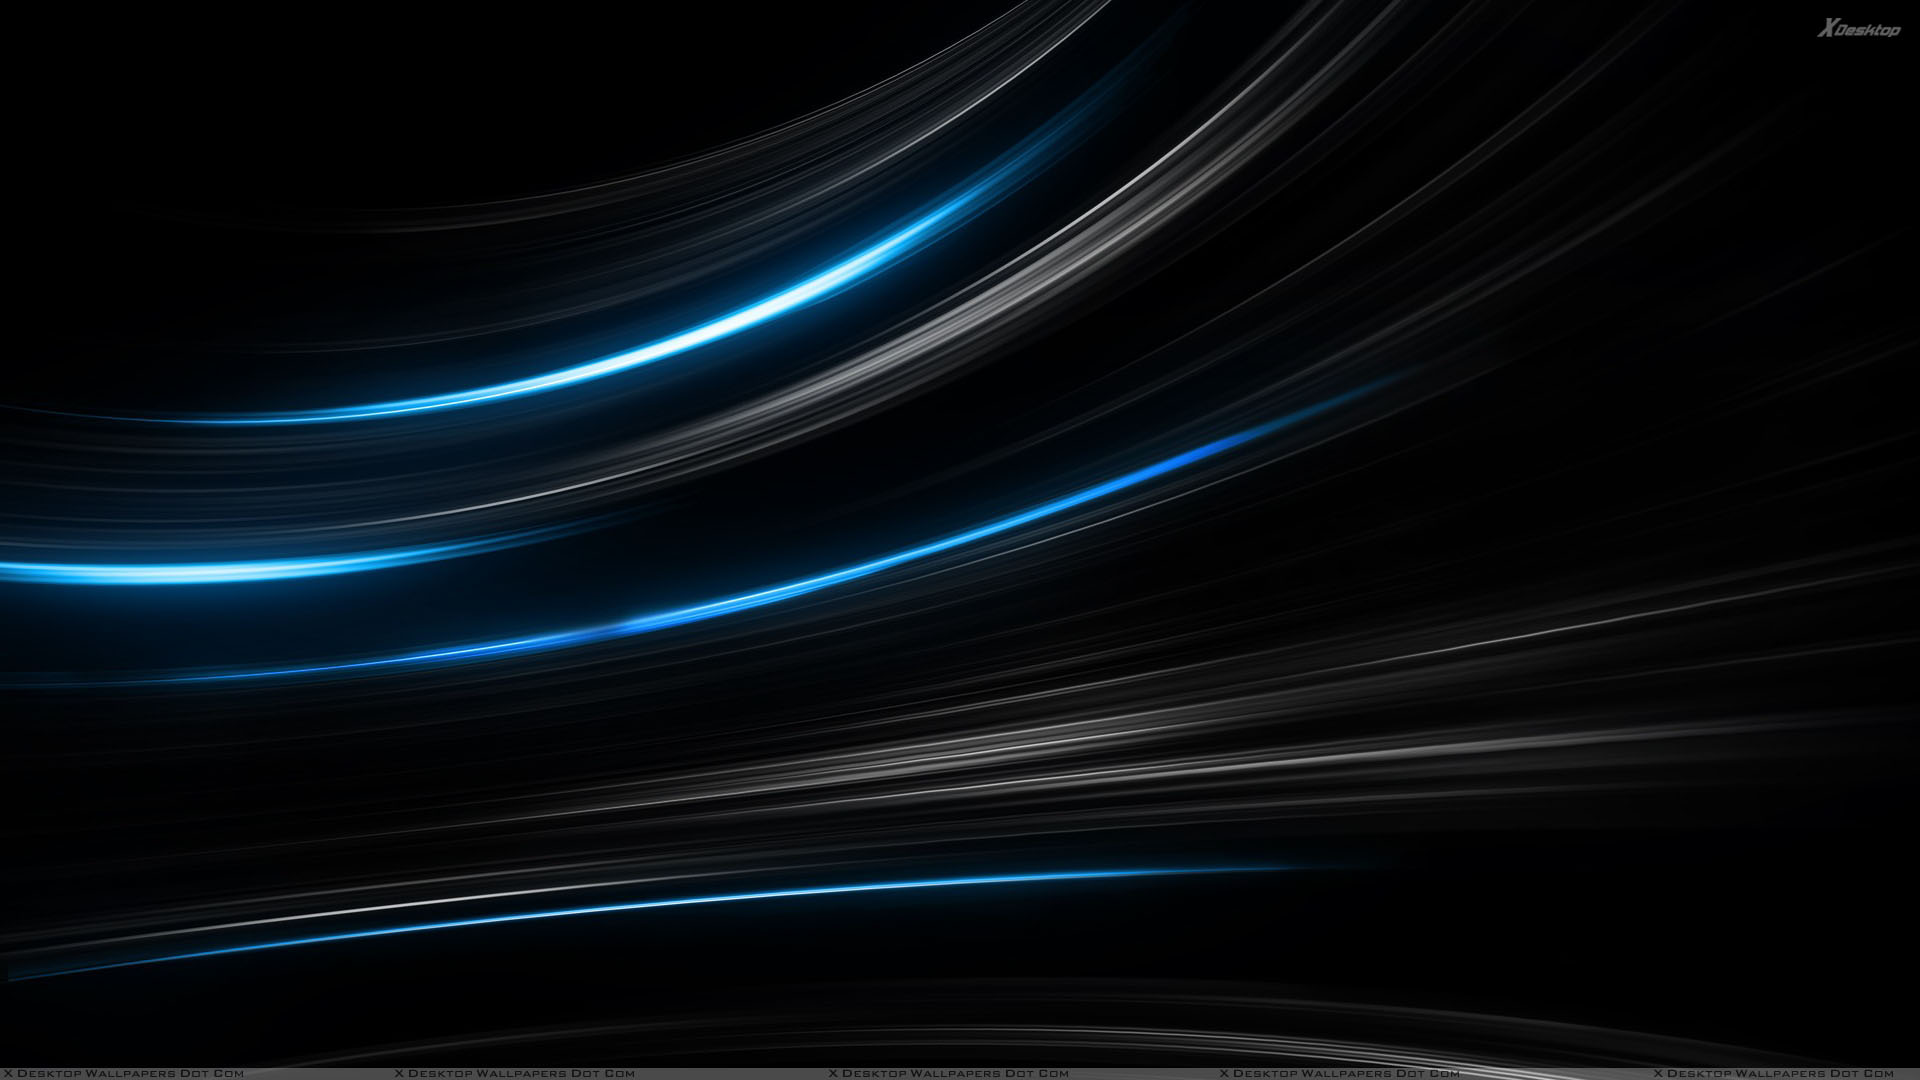 Blue And Black Shade Background Wallpaper Some